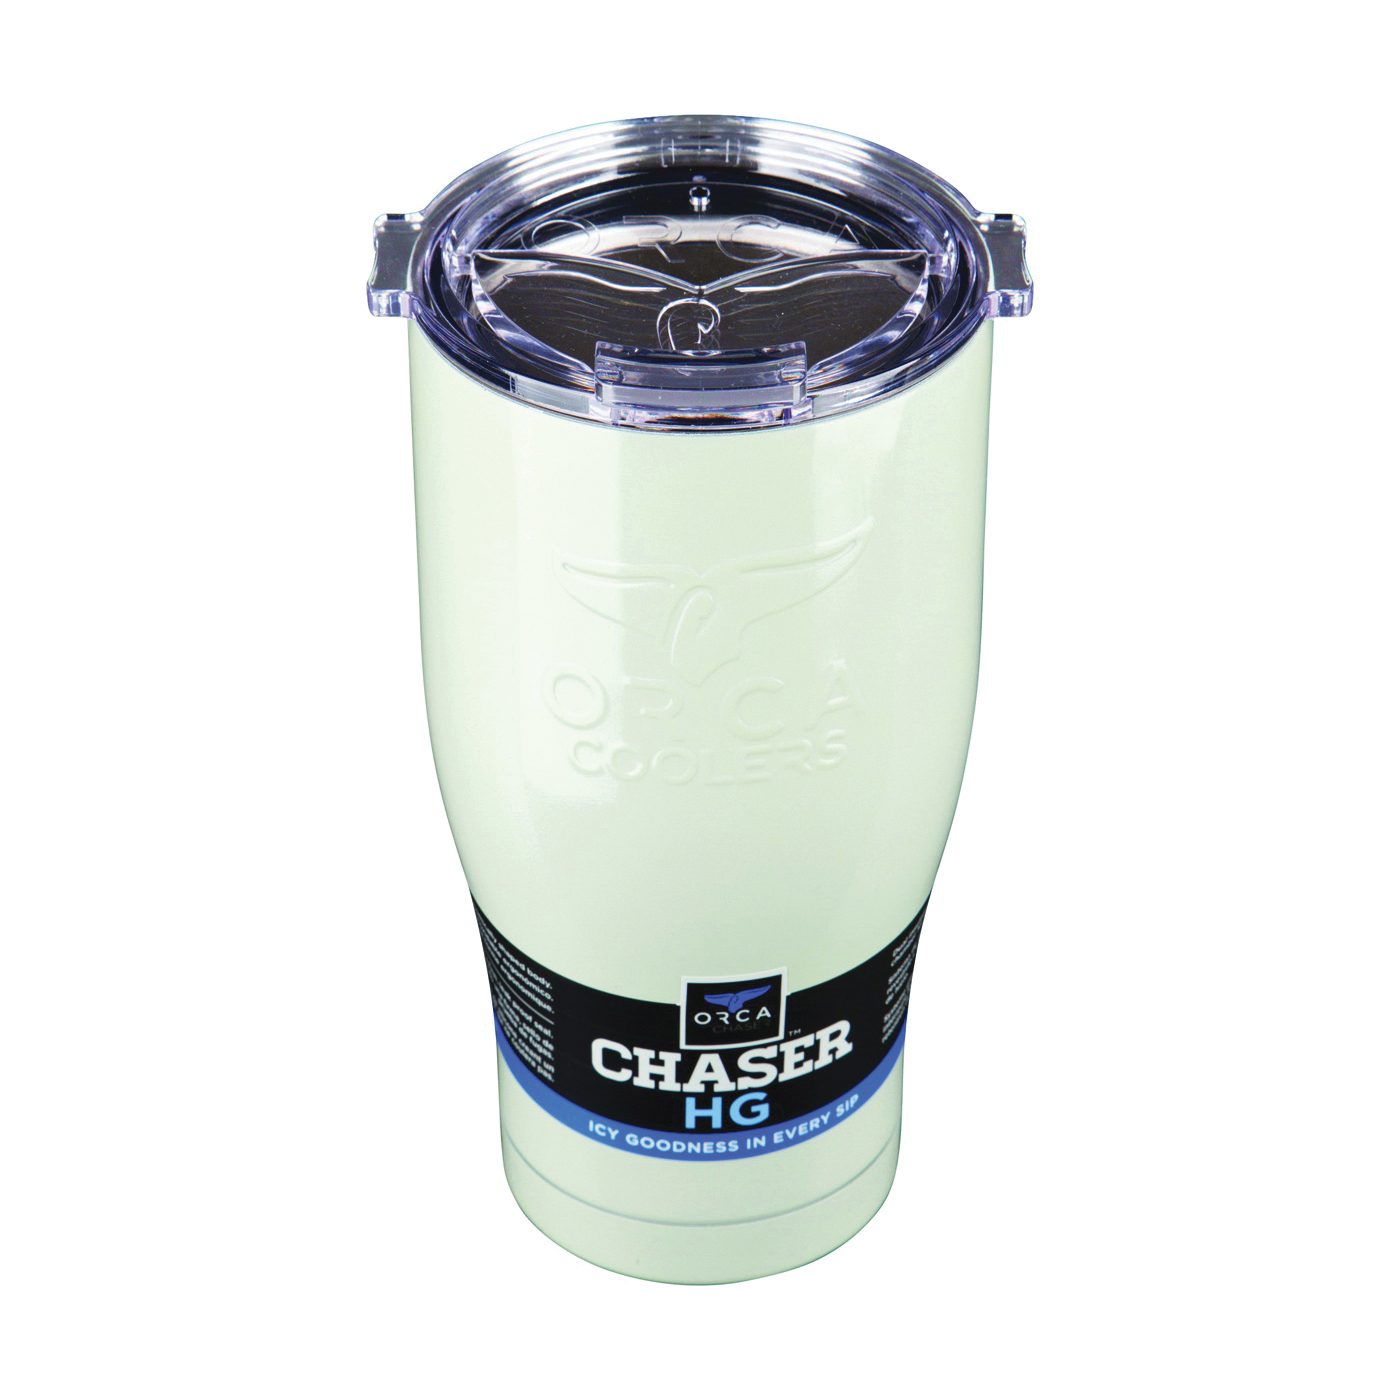 Chaser Series ORCCHA27PE/CL Tumbler, 27 oz, Stainless Steel, Pearl